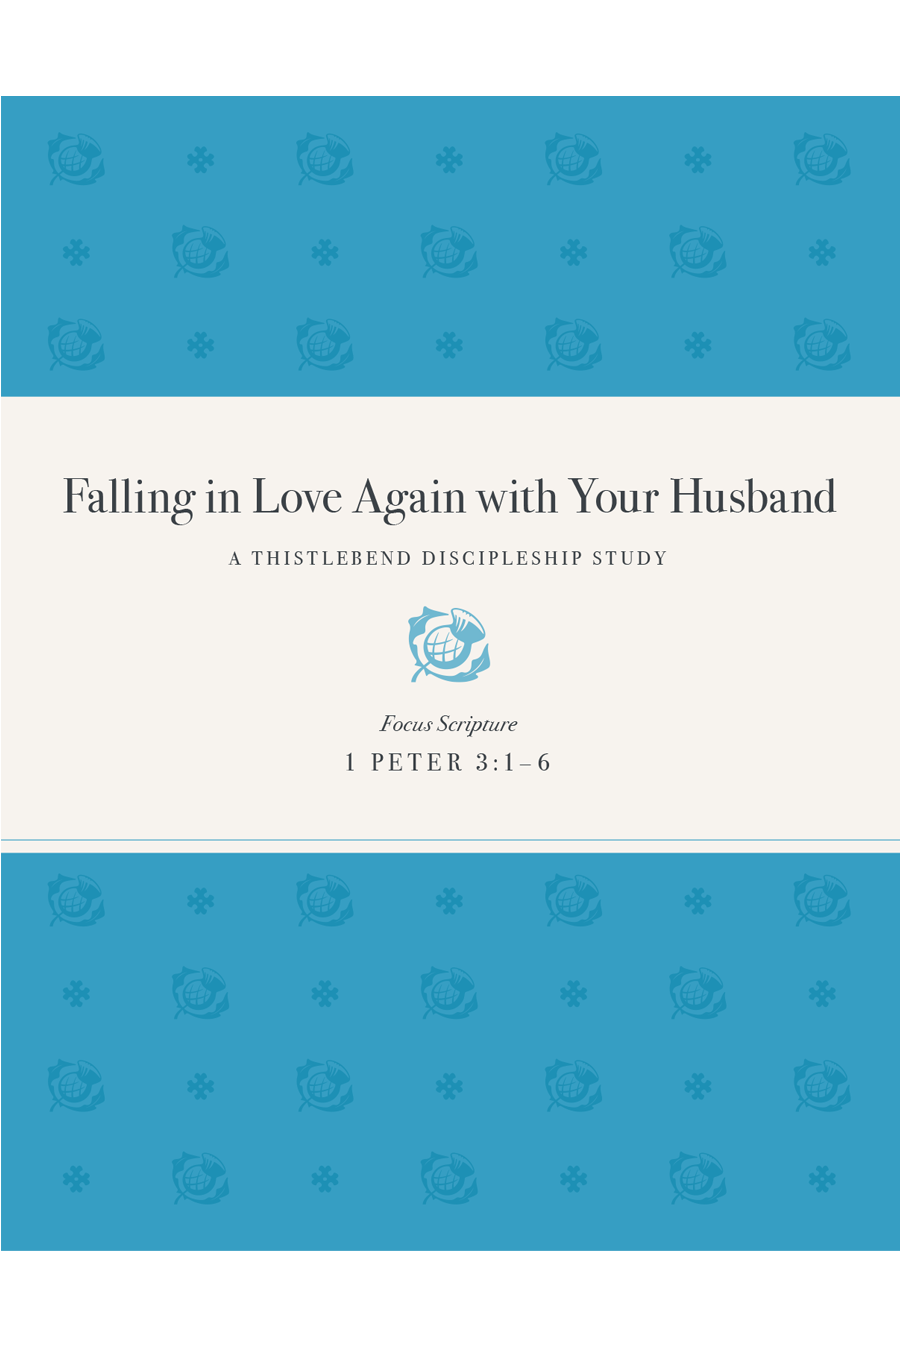 Falling in Love Again with Your Husband Study Cover